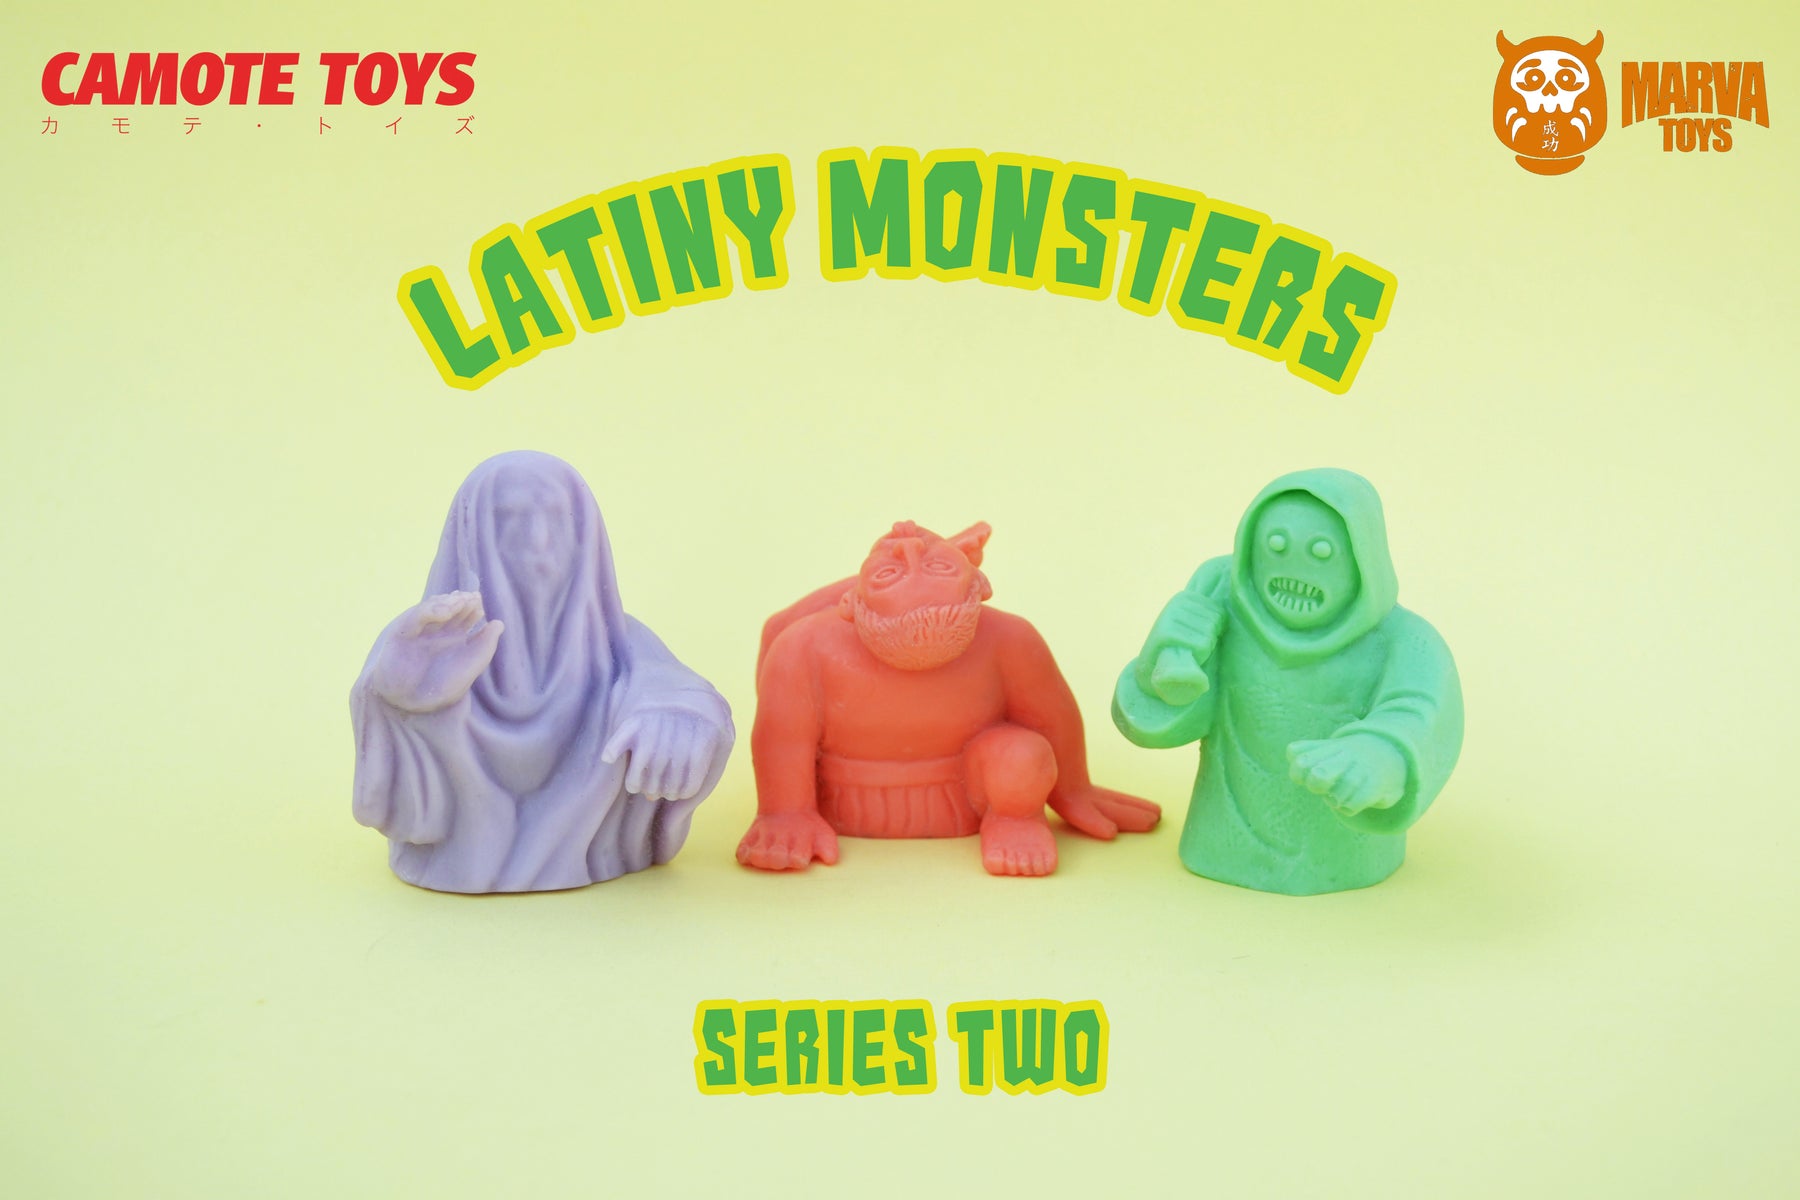 Latiny Monsters Series Two Available Now ! ! !